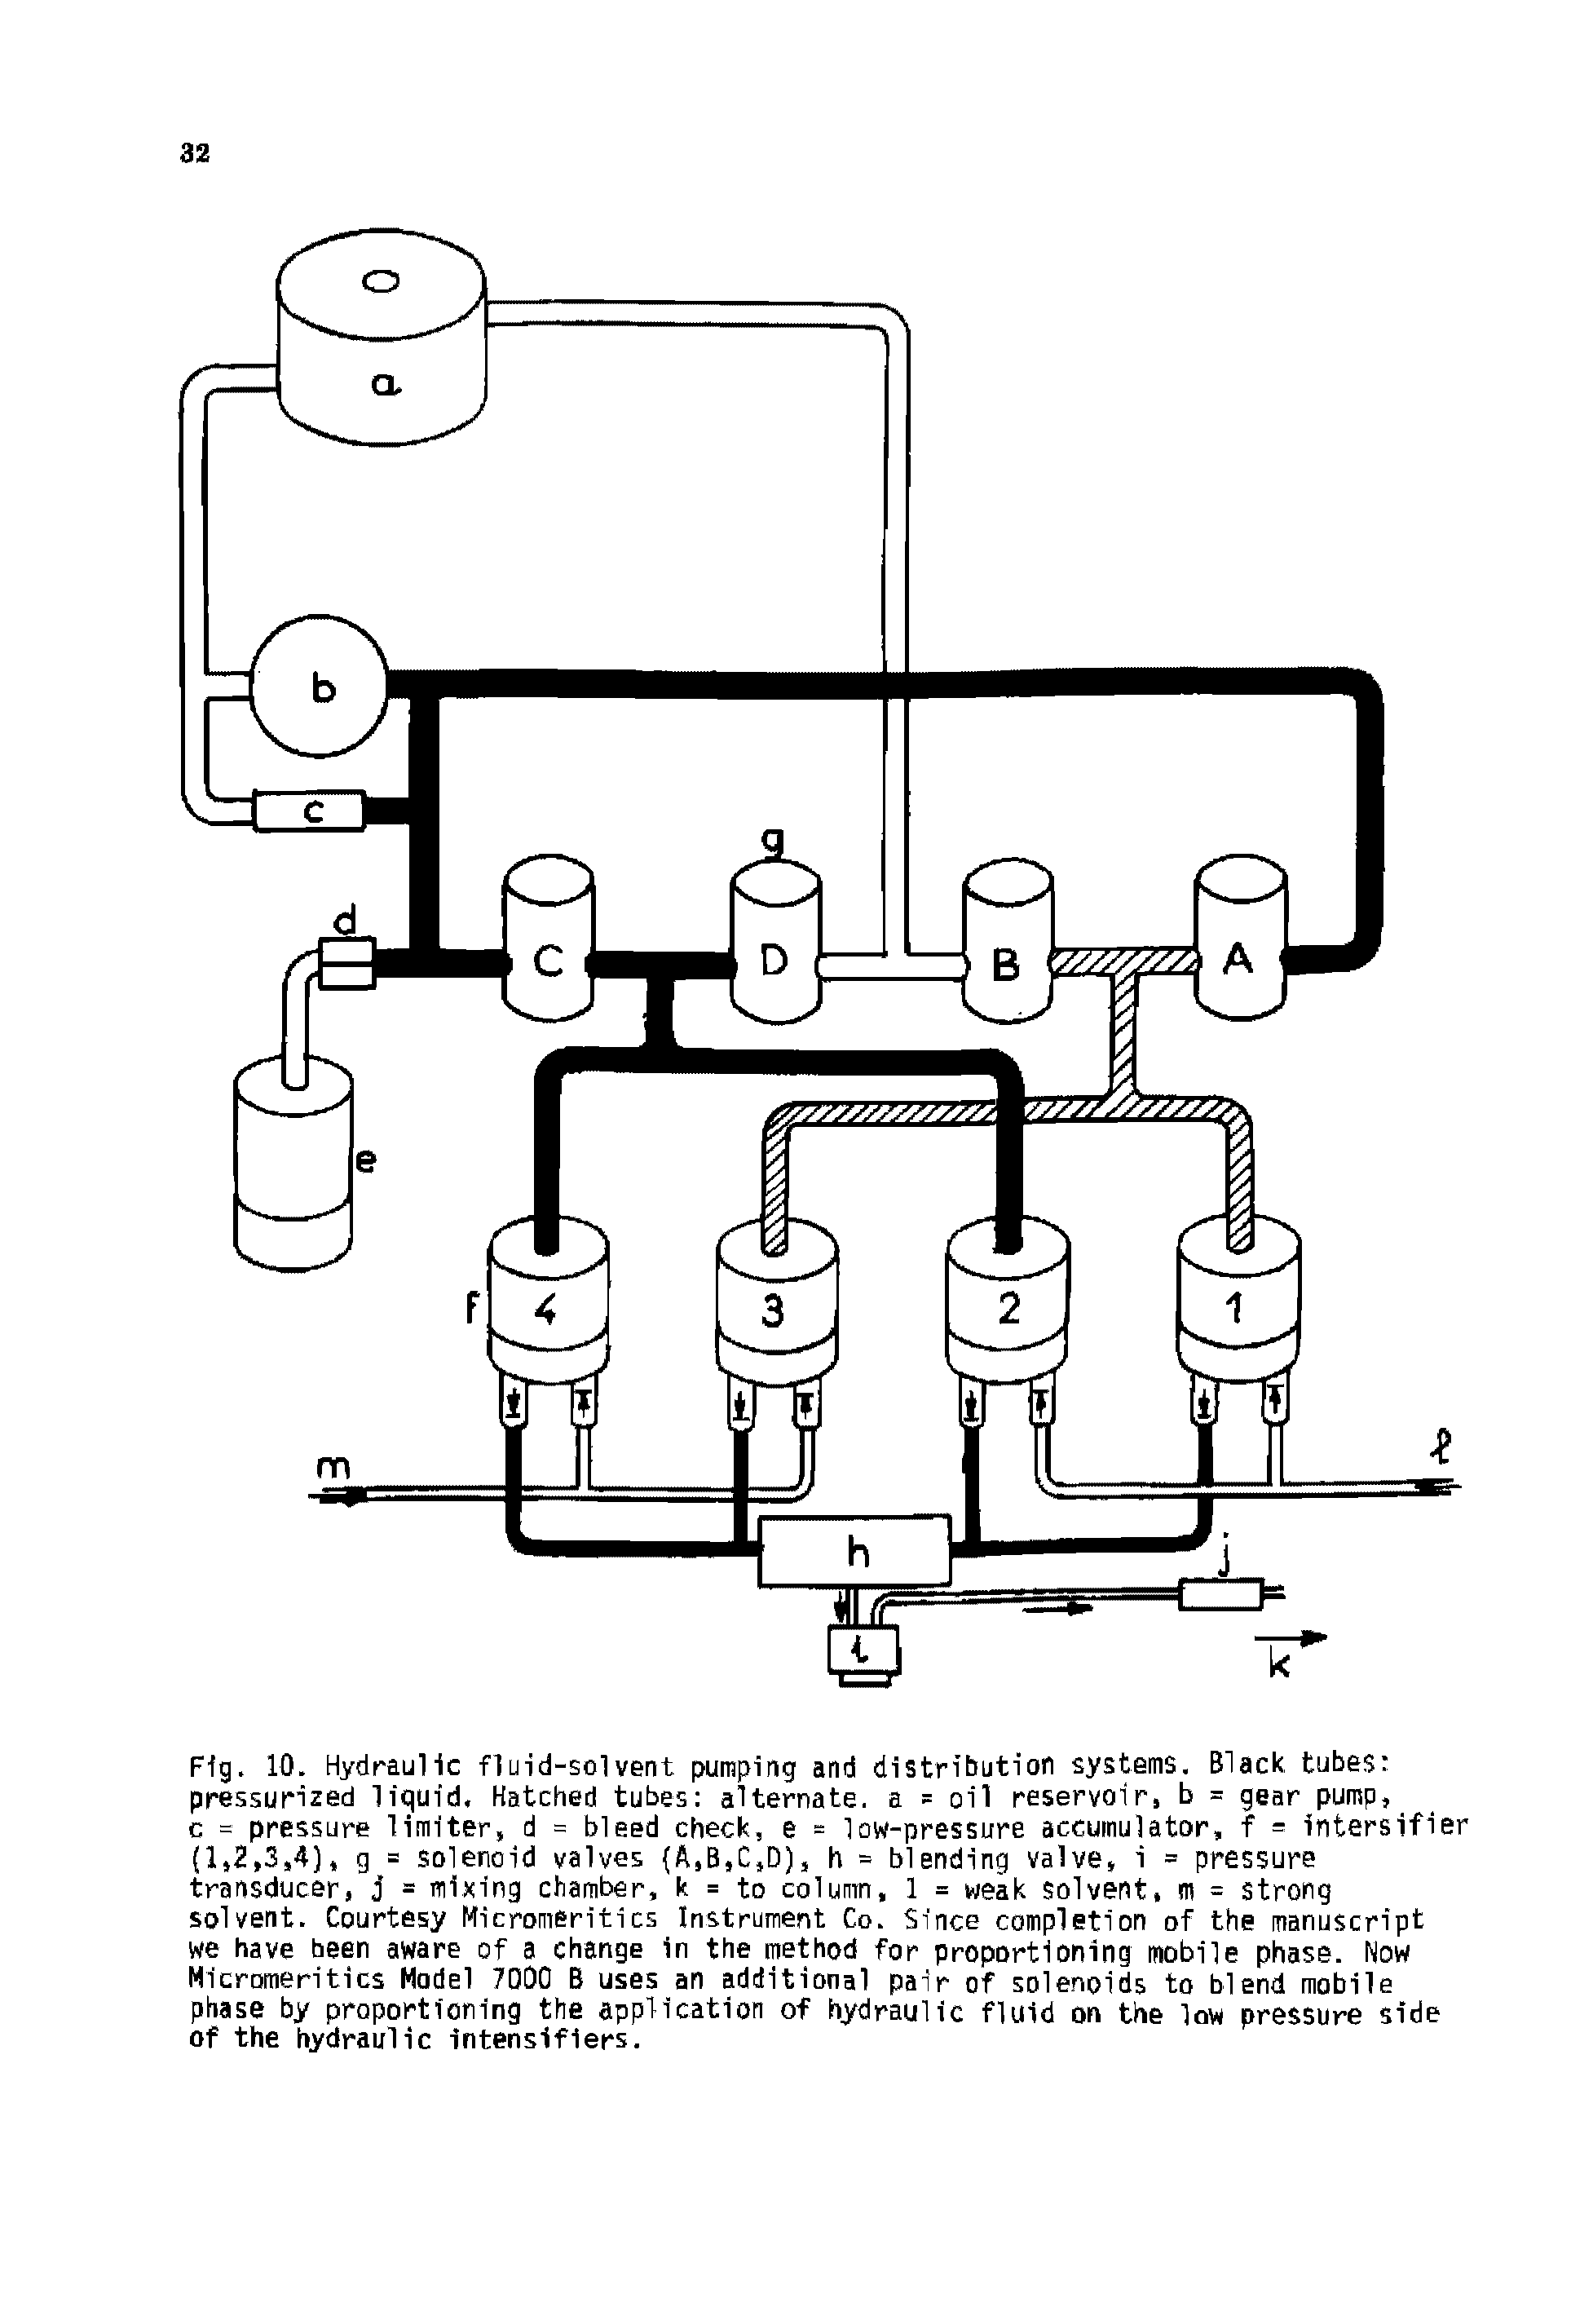 Fig. 10. Hydraulic fluid-solvent pumping and distribution systems. Black, tubes pressurized liquid. Hatched tubes alternate, a = oil reservoir, b = gear pump, c = pressure limiter, d = bleed check, e = low-pressure accumulator, f = intersifier (1,2,3,4), g = solenoid valves A,B,C,D), h = blending valve, i = pressure transducer, j = mixing chamber, k = to column, 1 = weak solvent, m = strong solvent. Courtesy Micromeritics Instrument Co. Since completion of the manuscript we have been aware of a change In the method for proportioning mobile phase. Now Micromeritics Model 7000 B uses an additional pair of solenoids to blend mobile phase by proportioning the application of hydraulic fluid on the low pressure side of the hydraulic intensifiers.